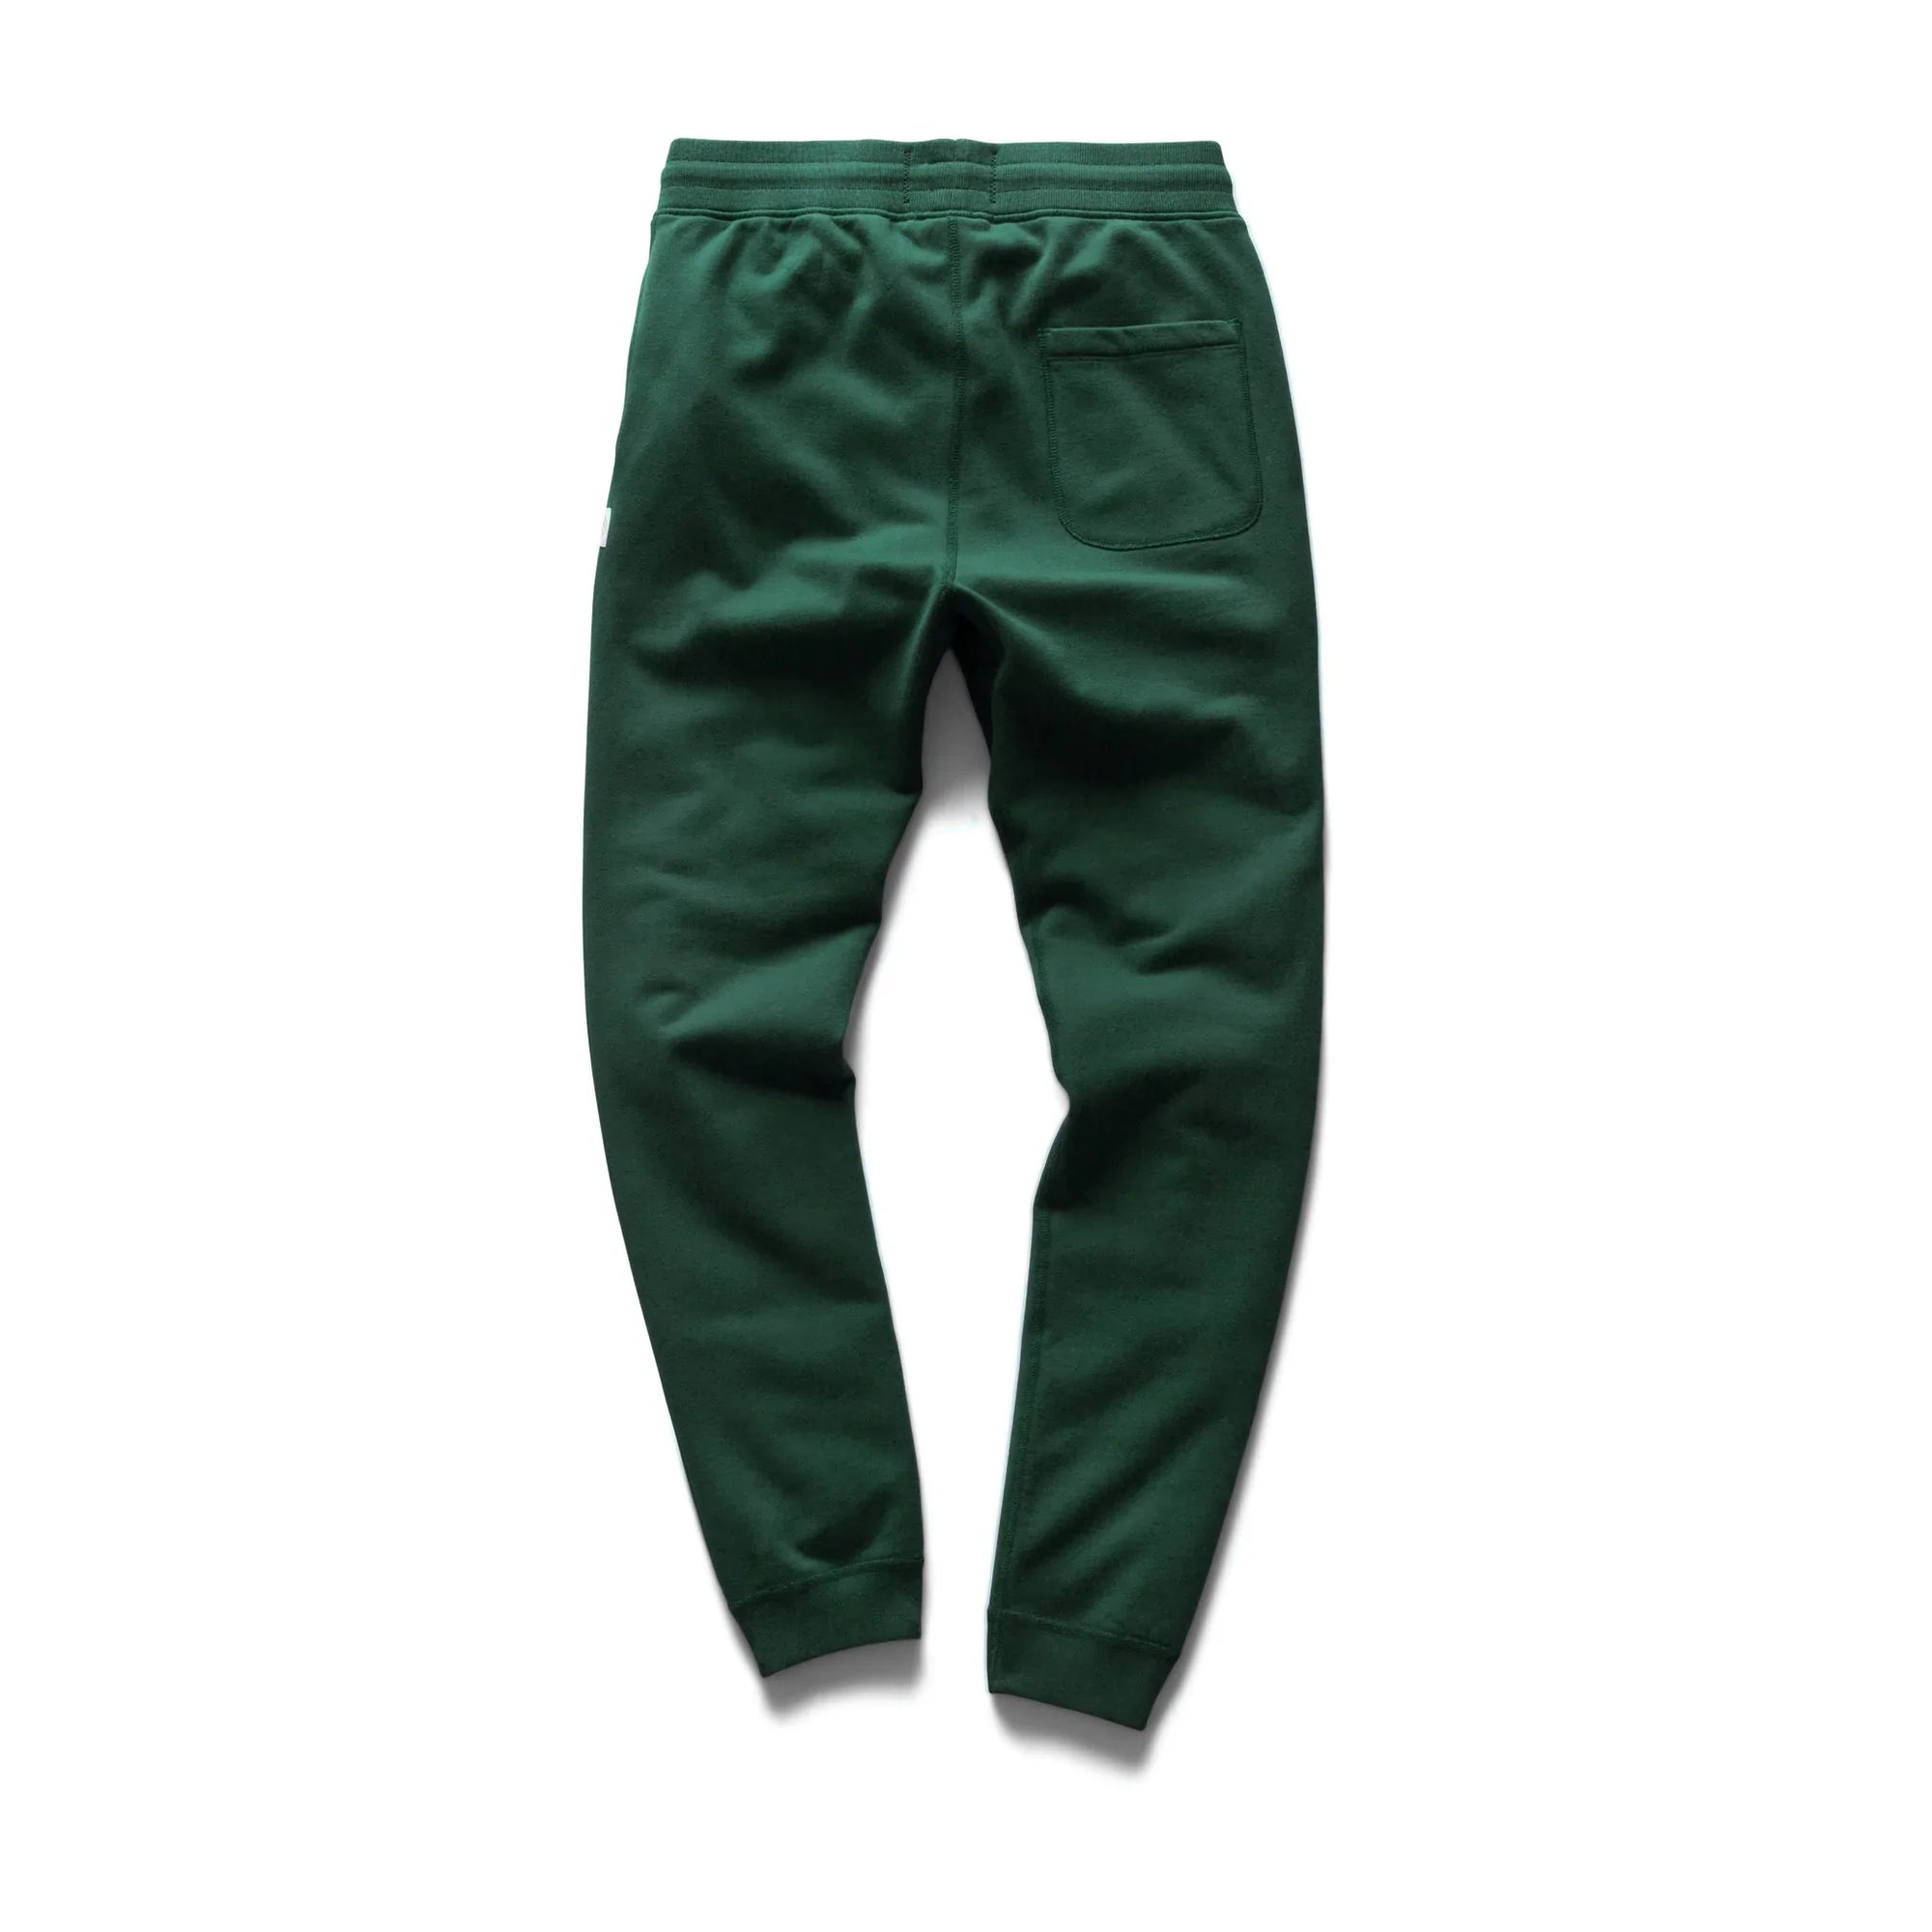 Reigning Champ Mid Weight Terry Slim Sweatpant in British Racing Green